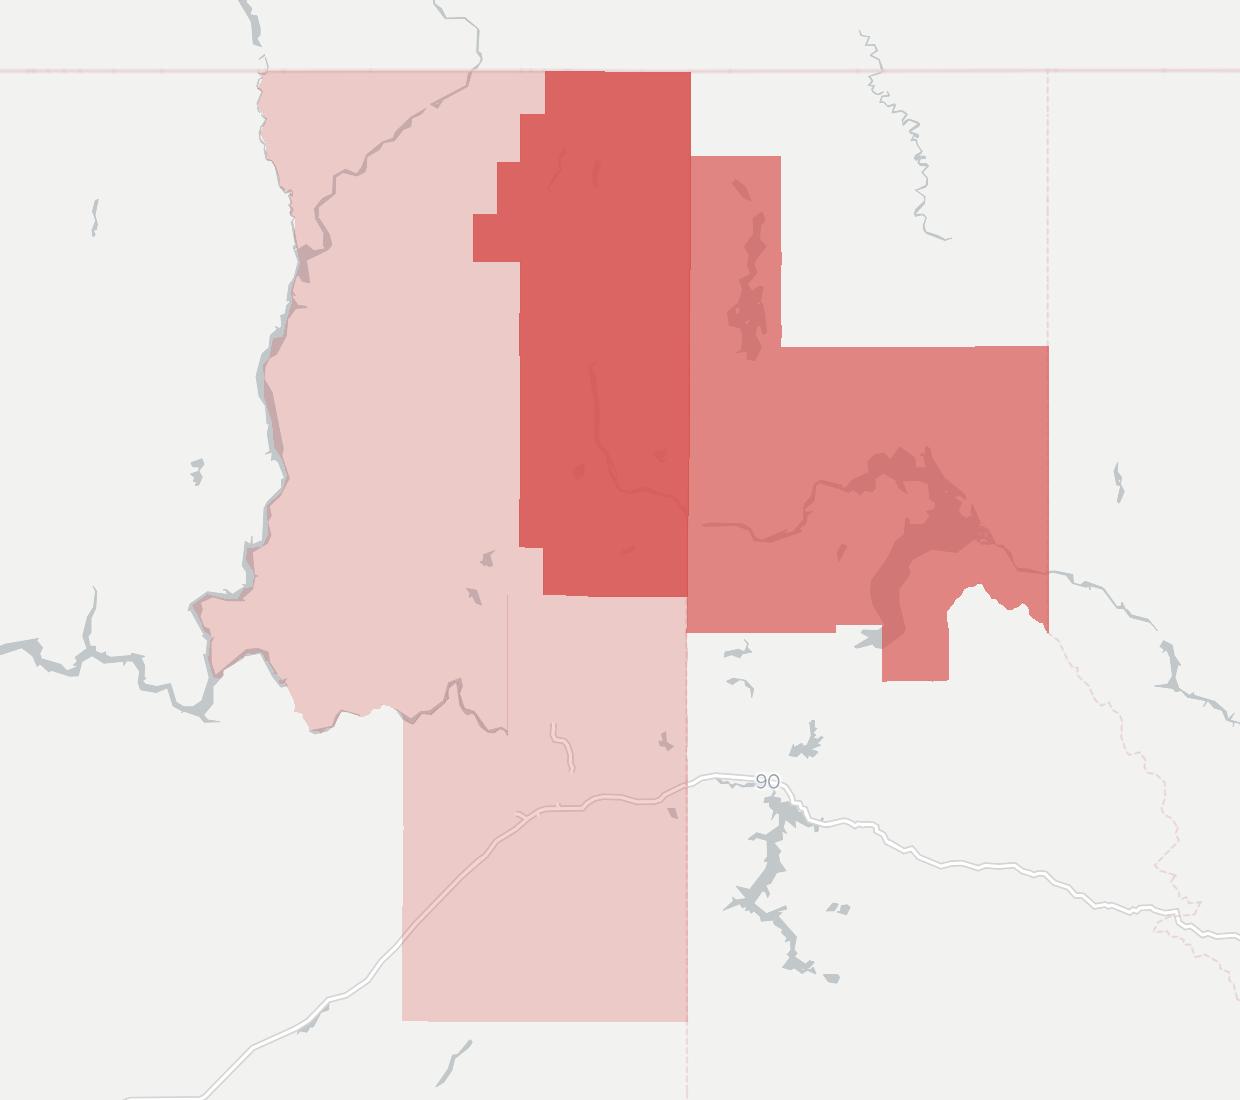 Pend Oreille Valley Networks Coverage Map